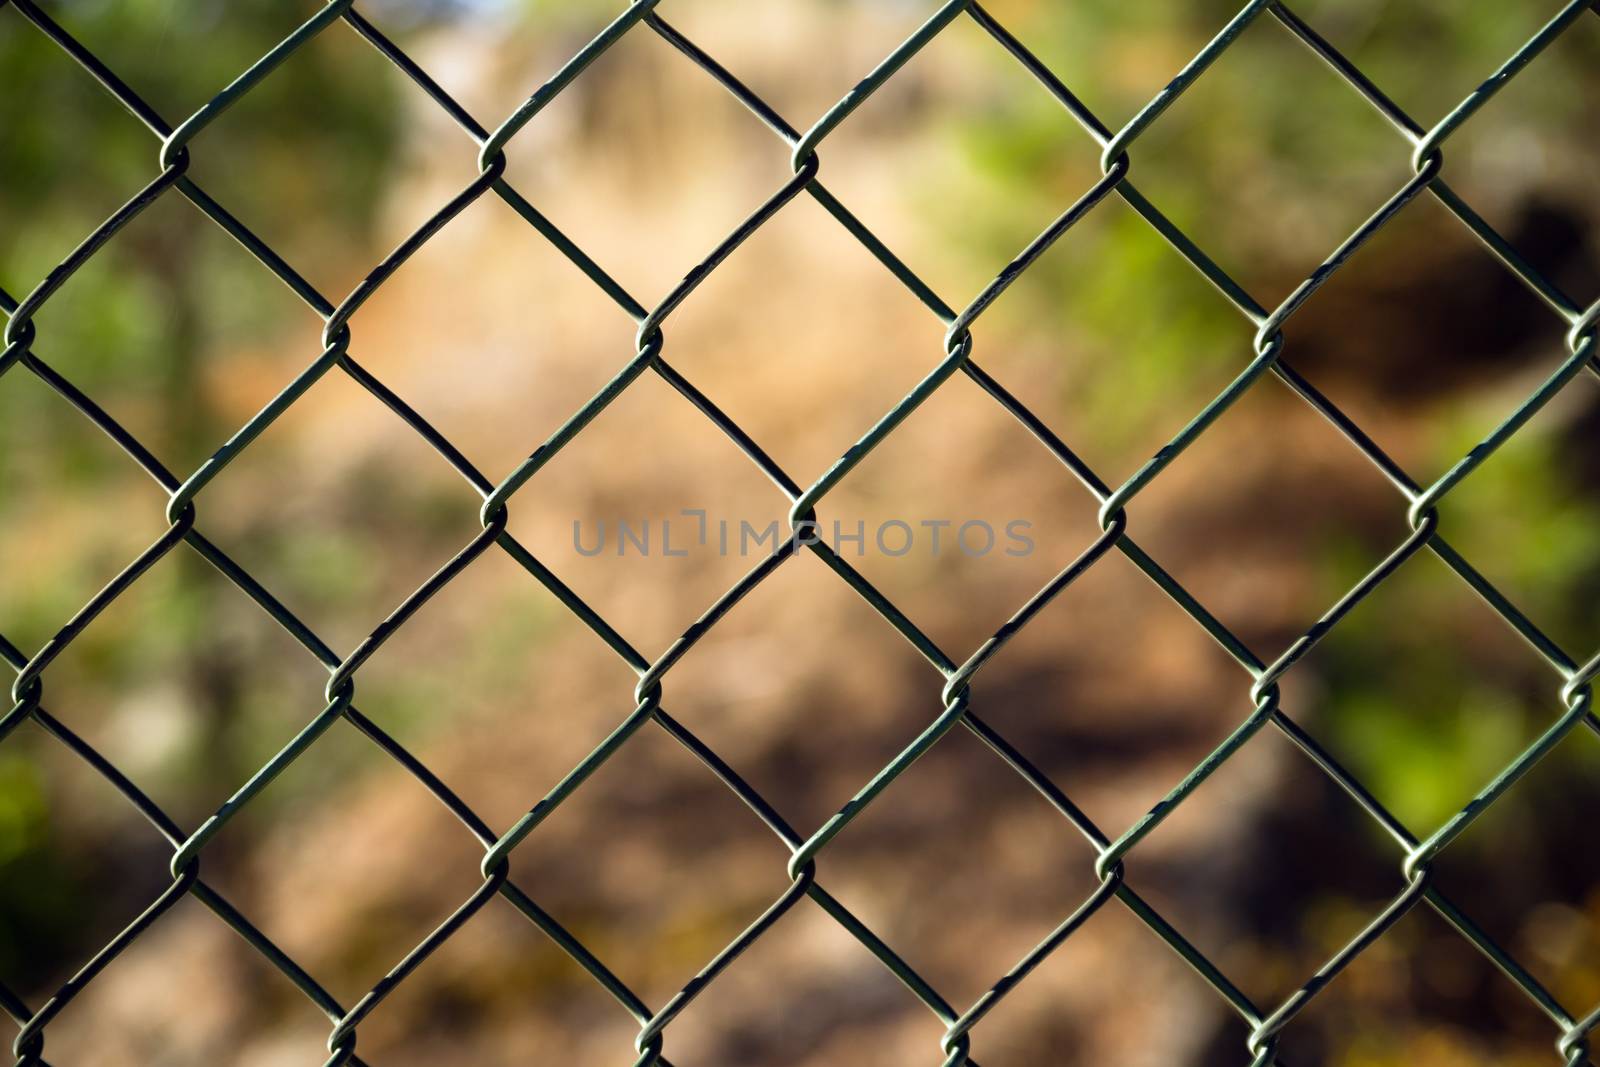 An ordinary chain link fence section